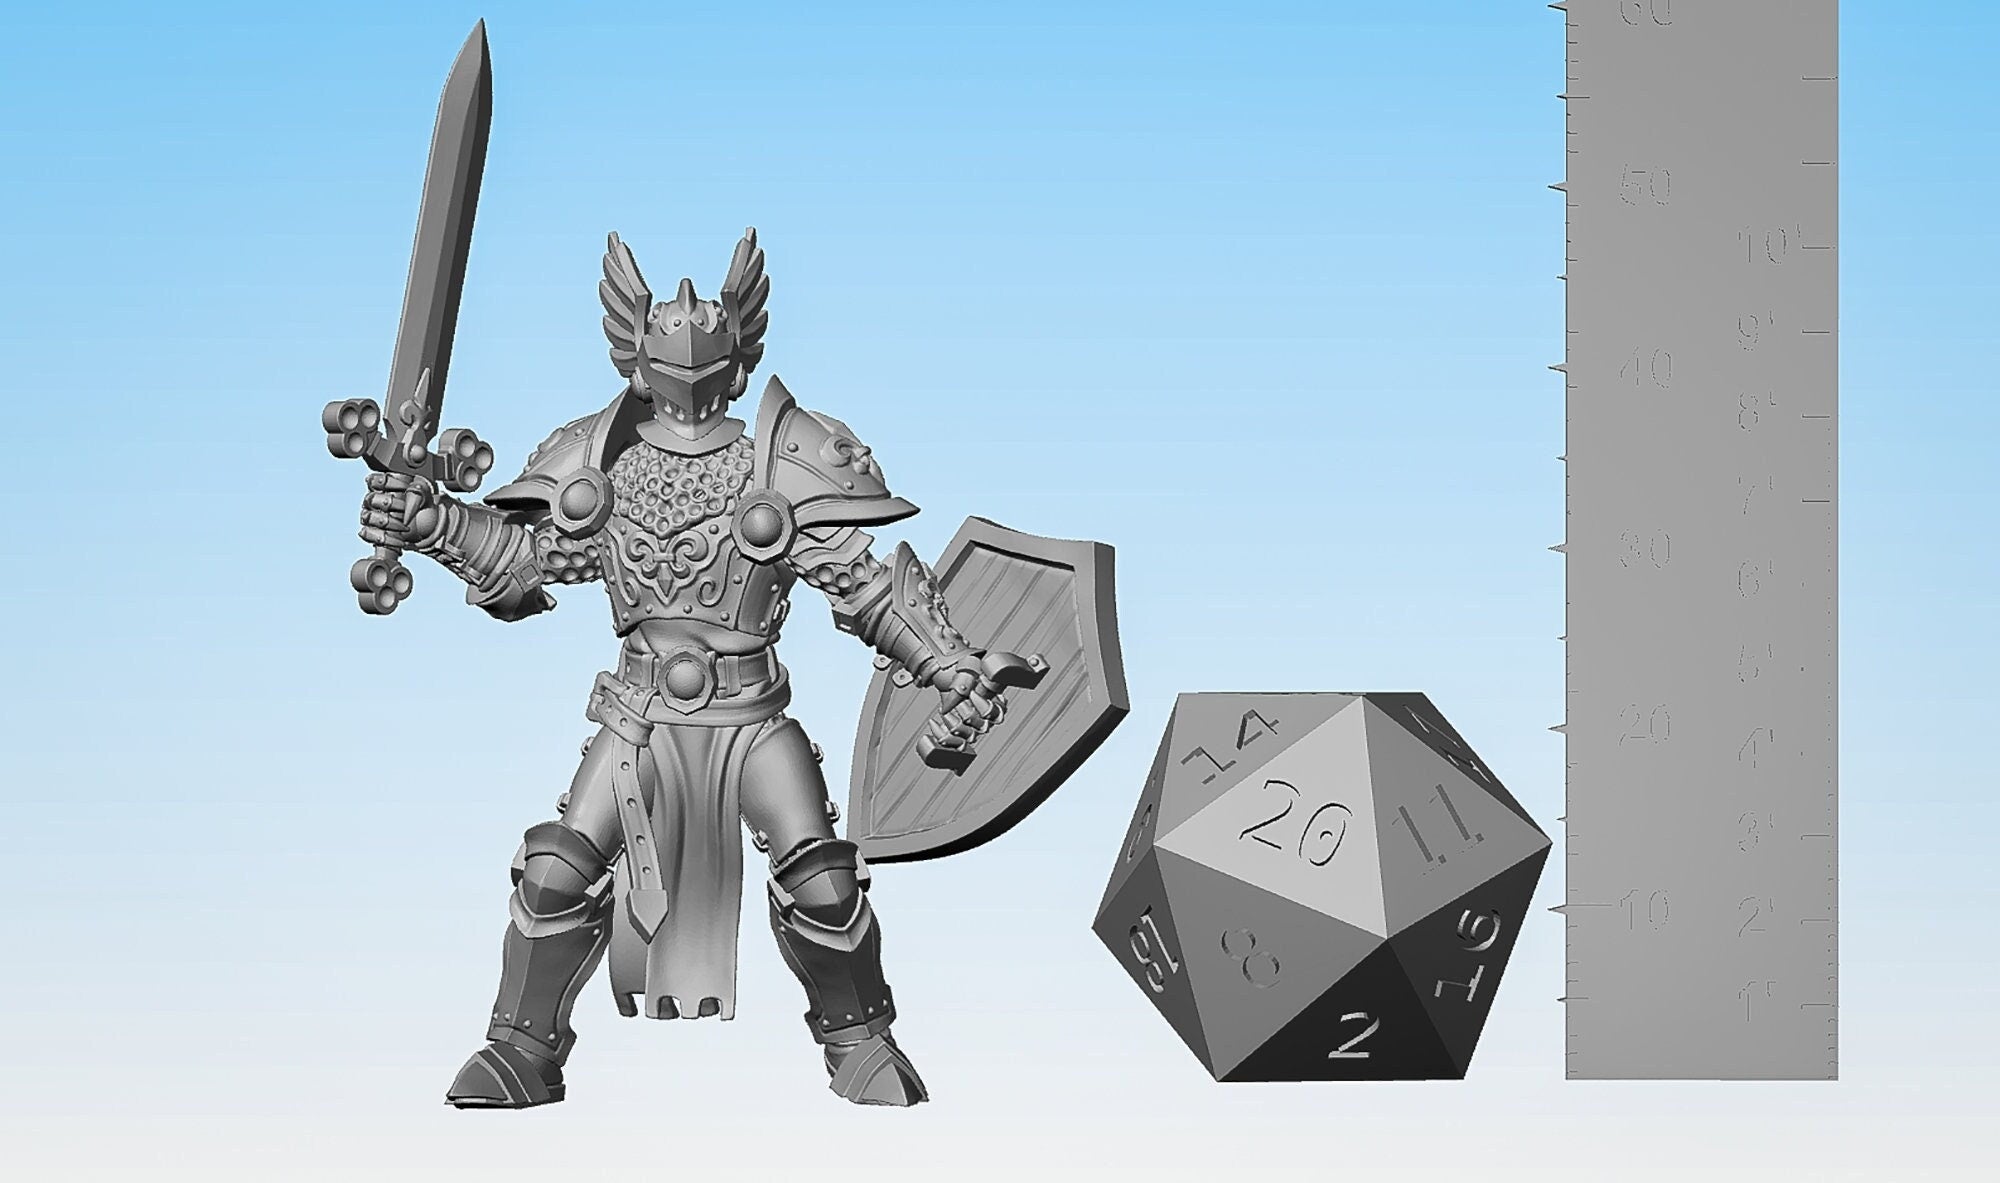 KNIGHT "Sword & Shield" #01-Role Playing Miniatures